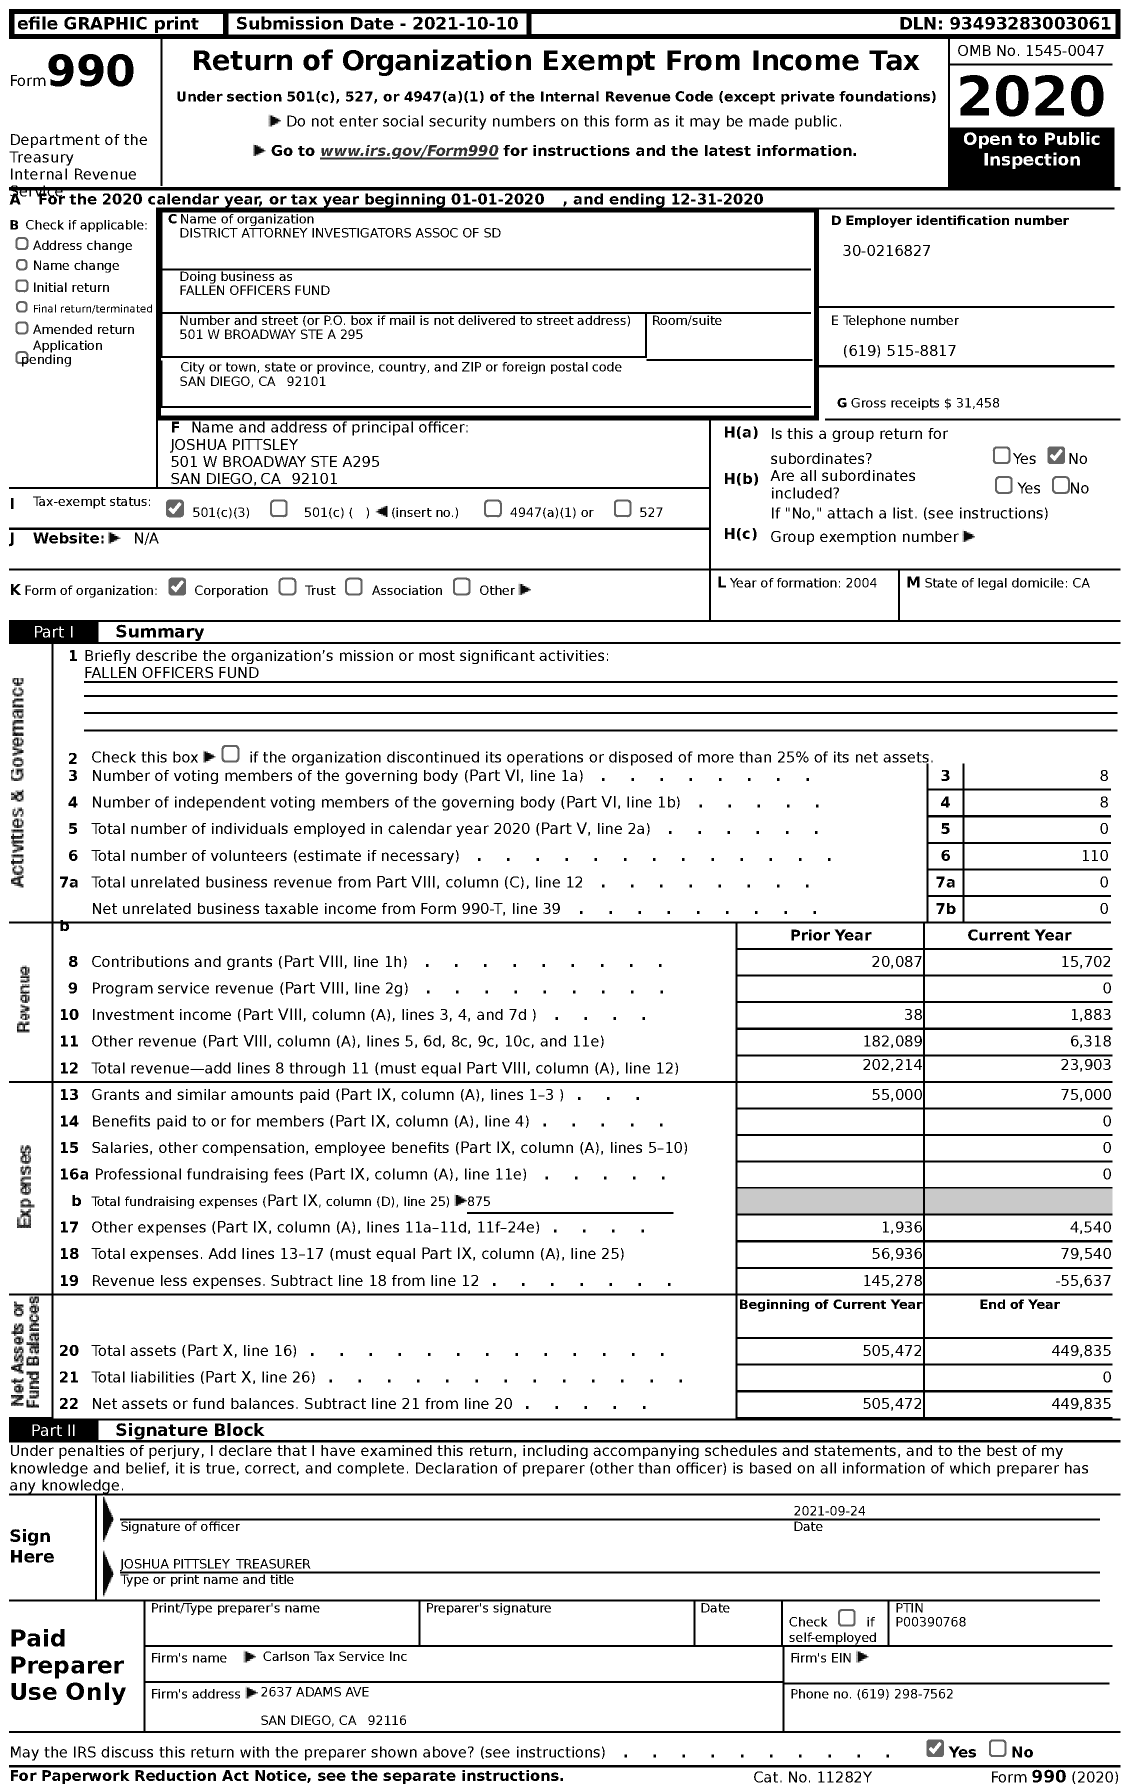 Image of first page of 2020 Form 990 for Fallen Officers Fund